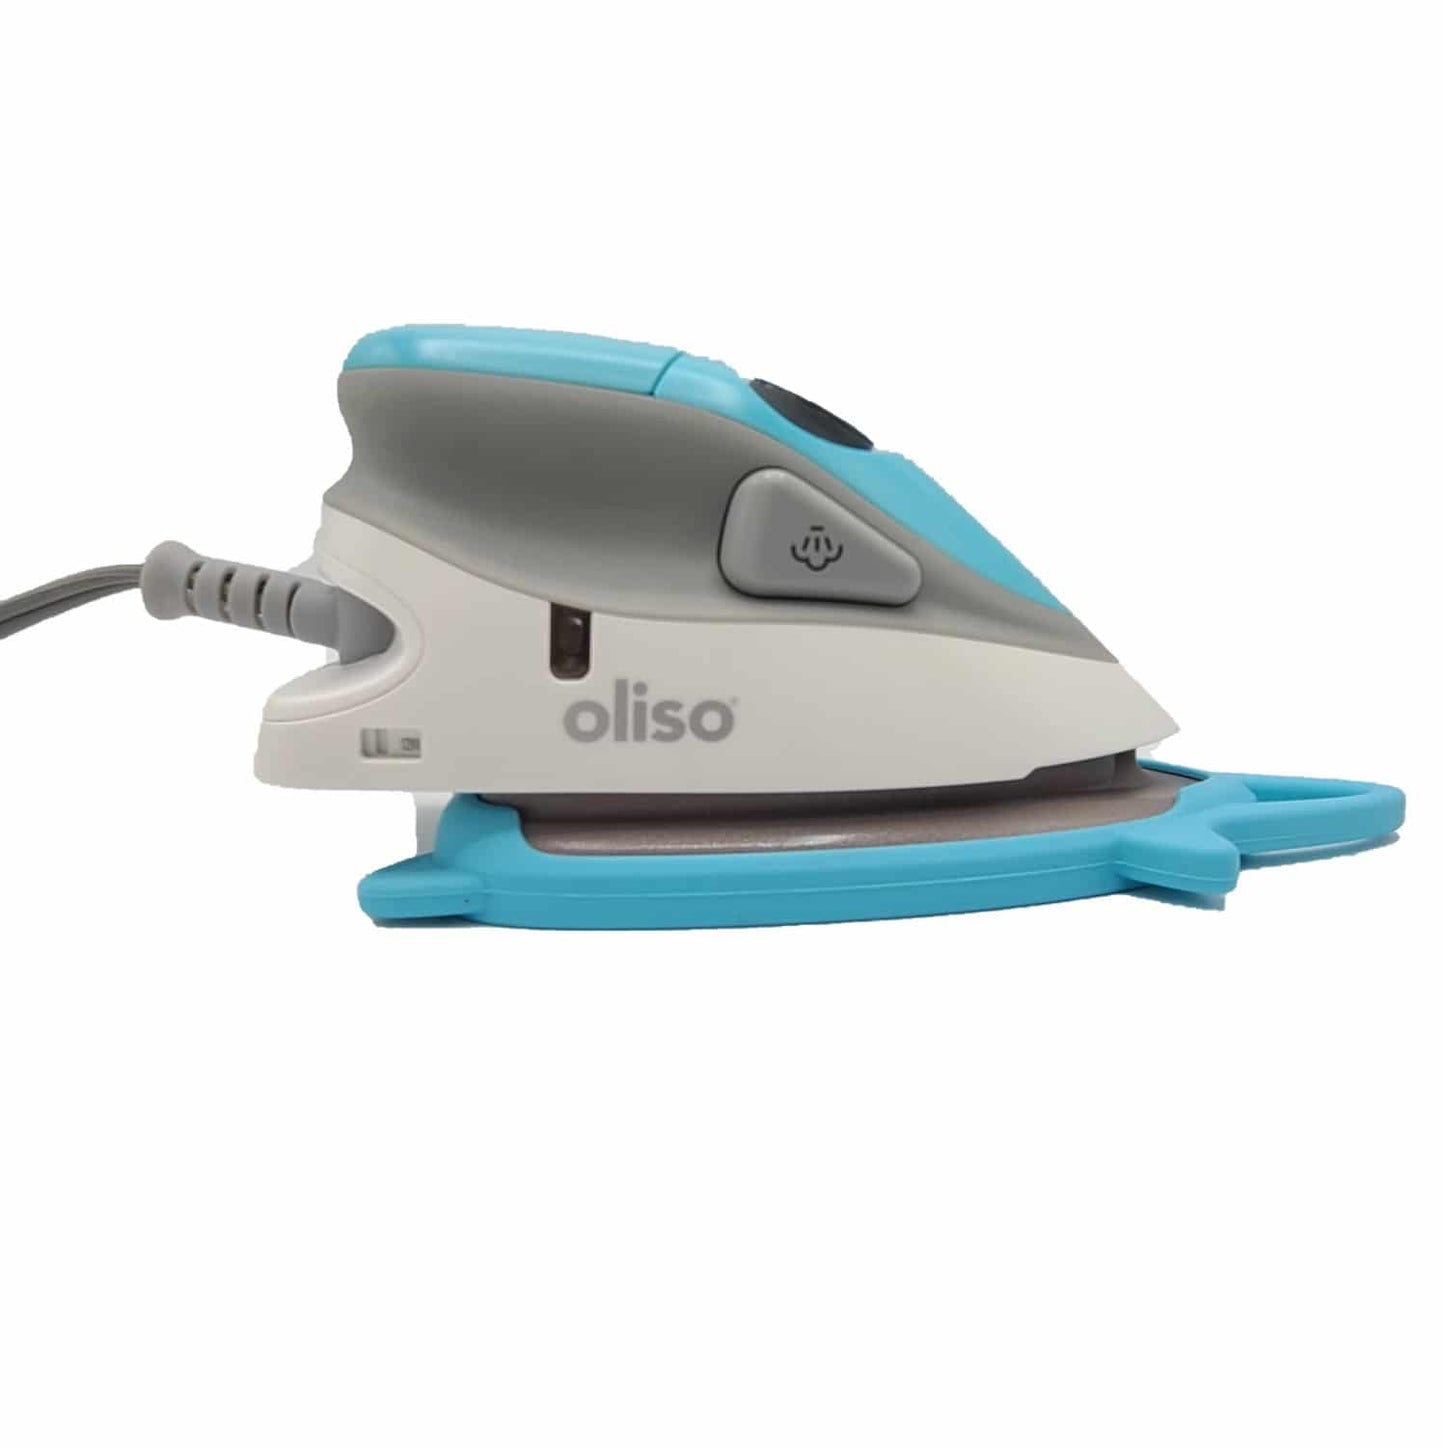 Oliso Mini Project Iron packs all the power of a full sized iron in a lightweight design, perfect to iron next to your sewing machine or travel to classes. It comes with a silicone trivet so you can place your iron face down or travel and store your project iron safely.  Features:  One-press steam control Universal voltage - Switch between 120v and 240v One-press steam control 1000 watts of power Precision tip 8' cord with a 180 degree pivot Fabric selector Manufacturer offers limited three year warranty